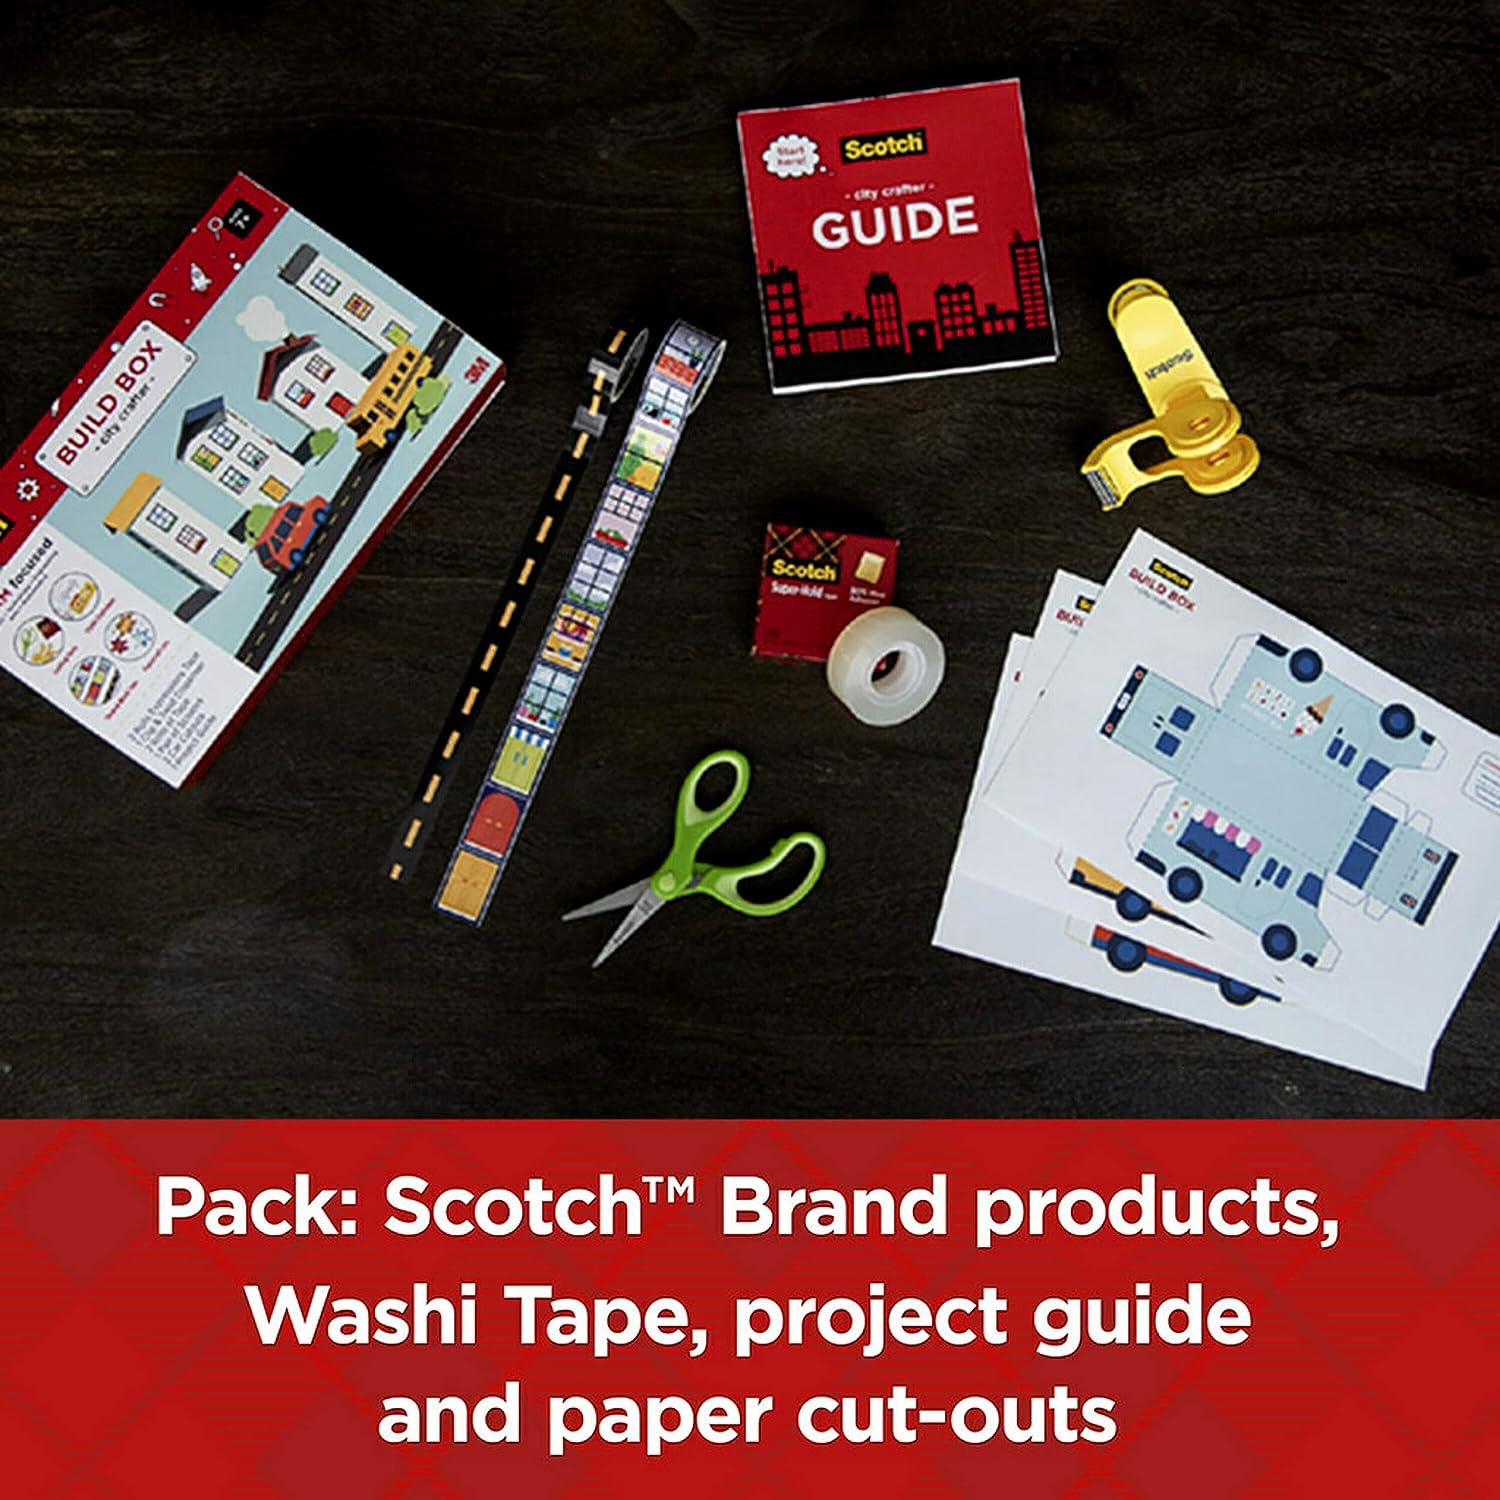 Scotch Expressions Tape Project Book